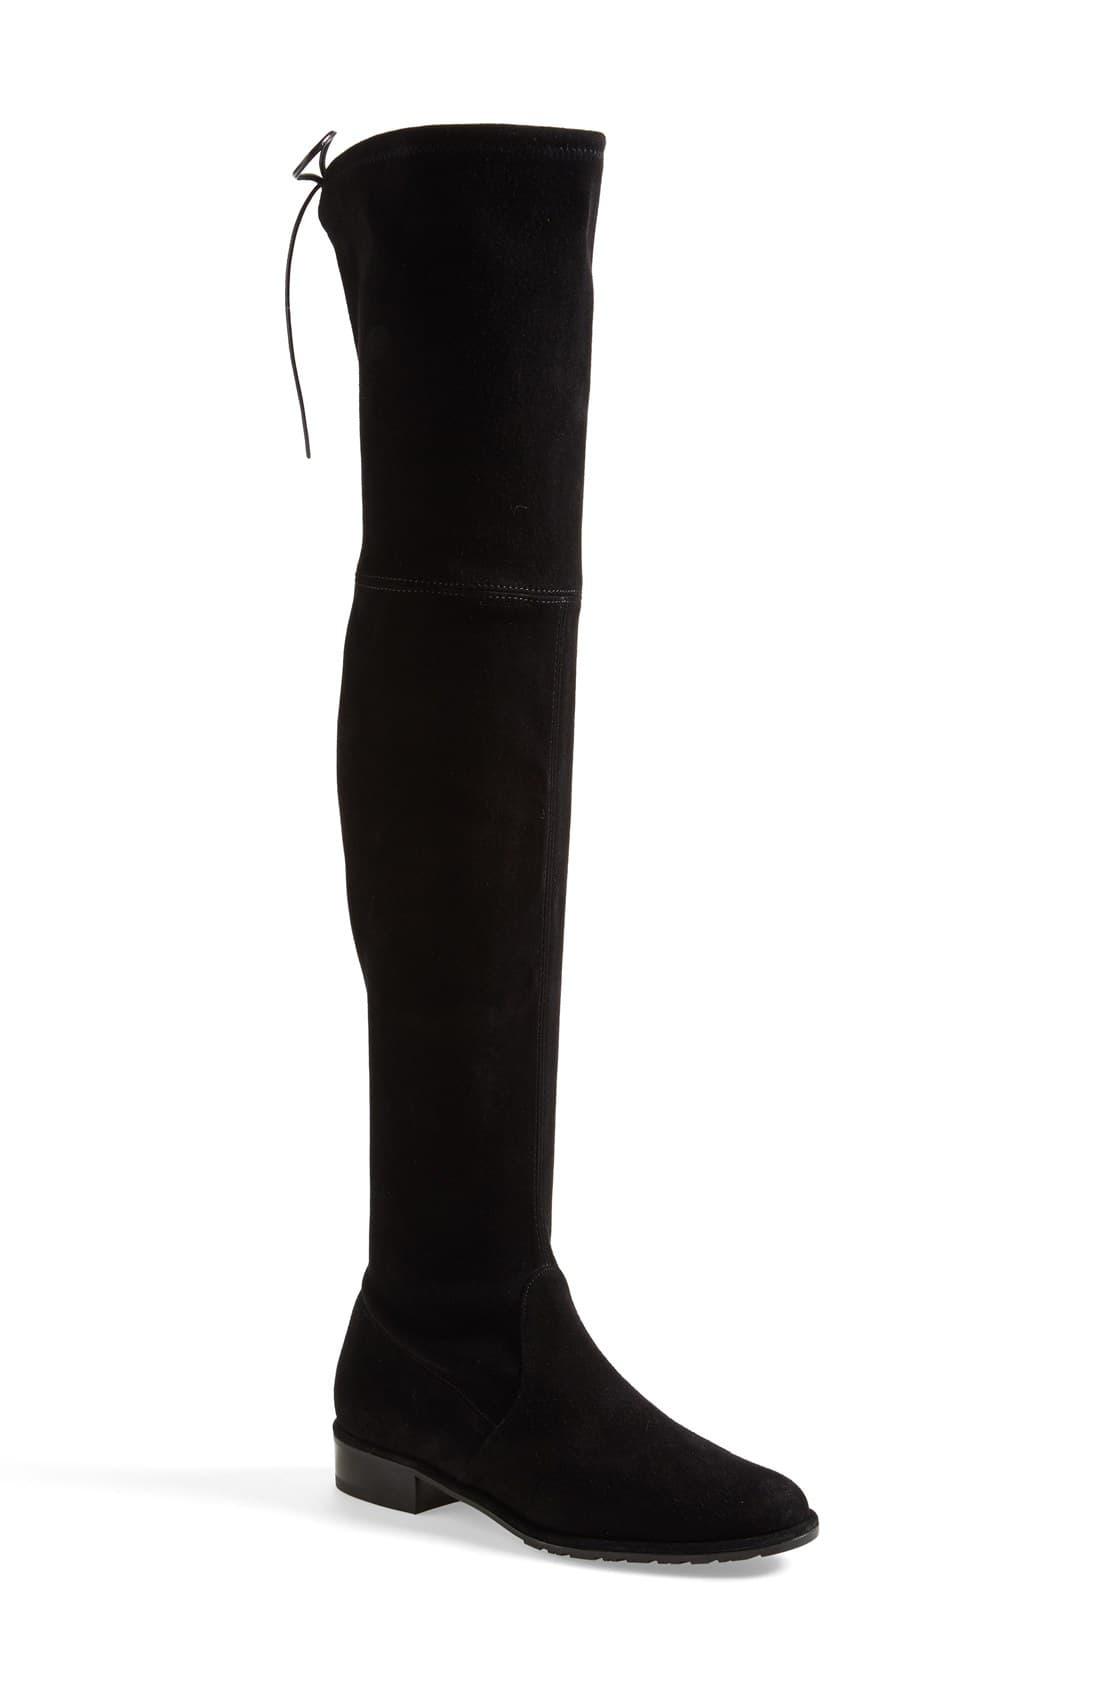 Stuart Weitzman Lace 'lowland' Over The Knee Boot in Black Suede (Black